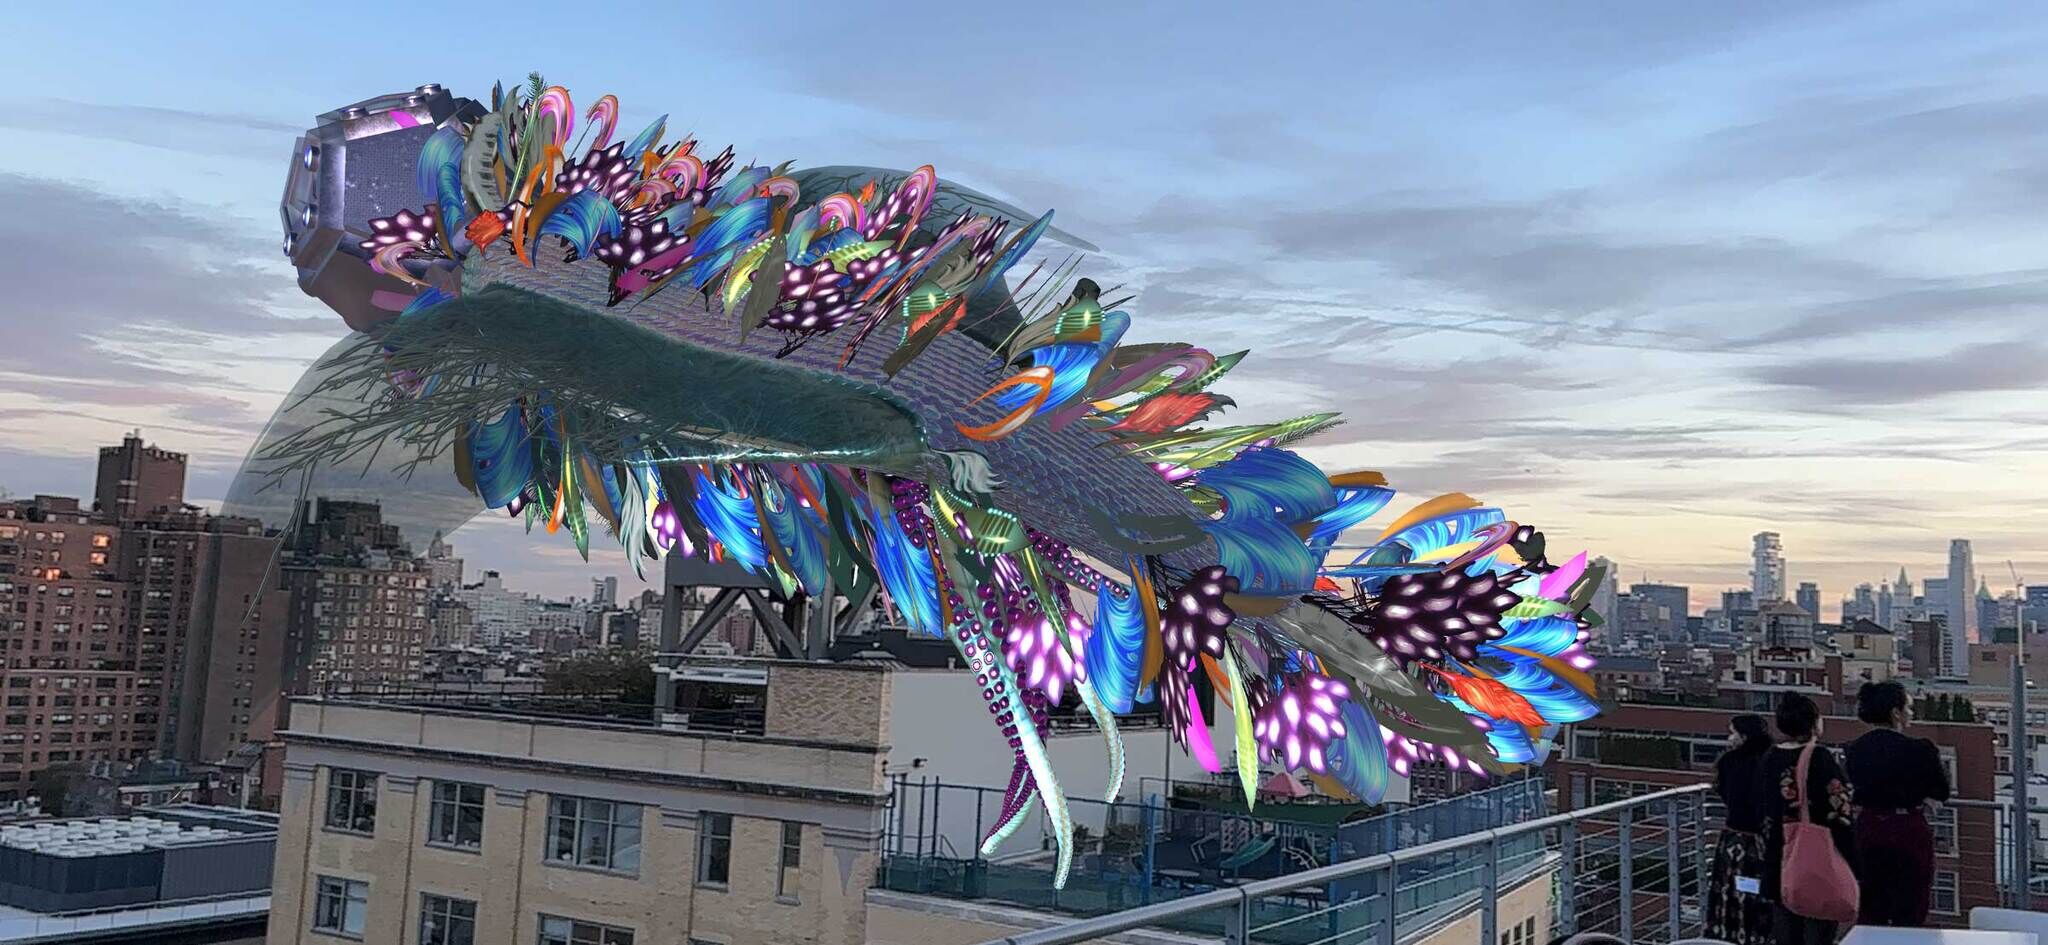 A creature covered in feathers hovering above people on a terrace.